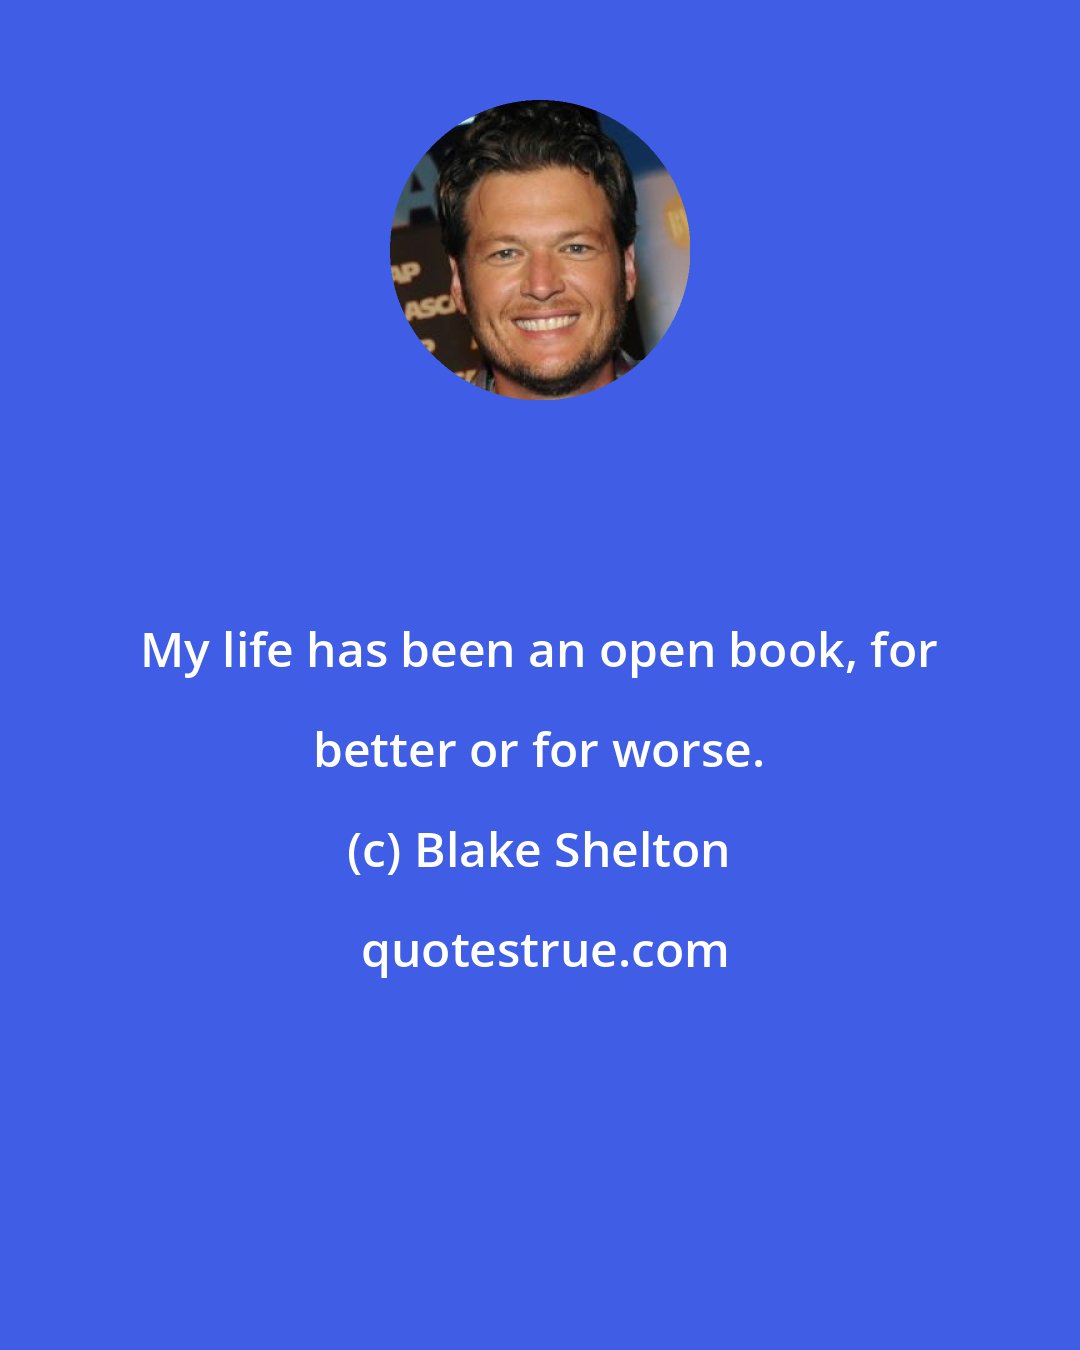 Blake Shelton: My life has been an open book, for better or for worse.